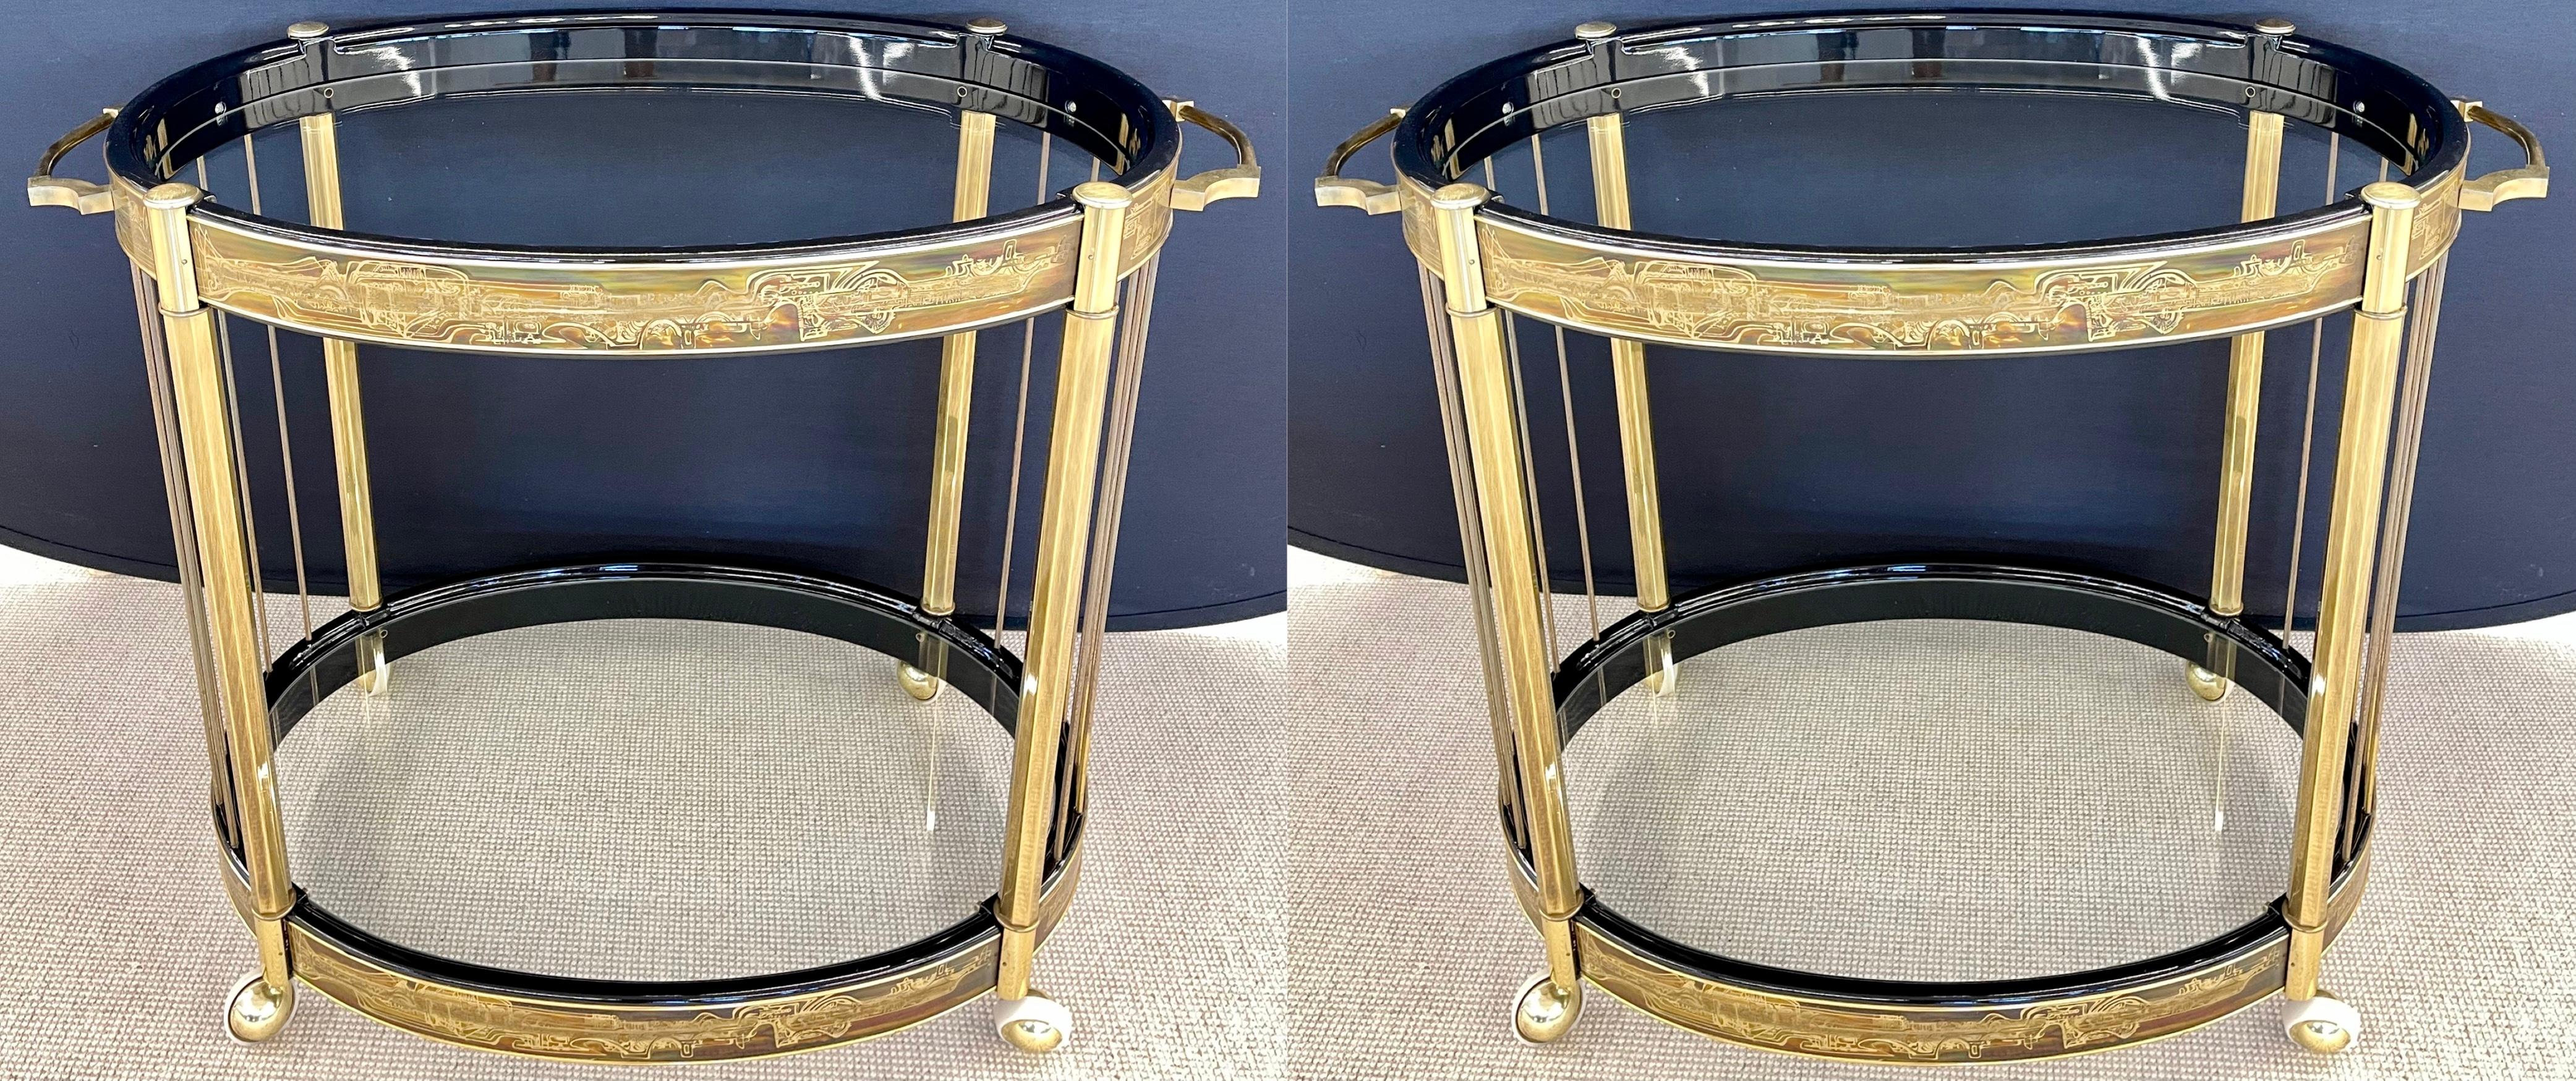 A pair of Mid-Century Modern master-craft brass acid etched bar-carts or serving wagons. This one of a kind pair of simply stunning bar carts or servers has two oval glass polished edge shelves supported by a pair of aprons all having wonderful acid